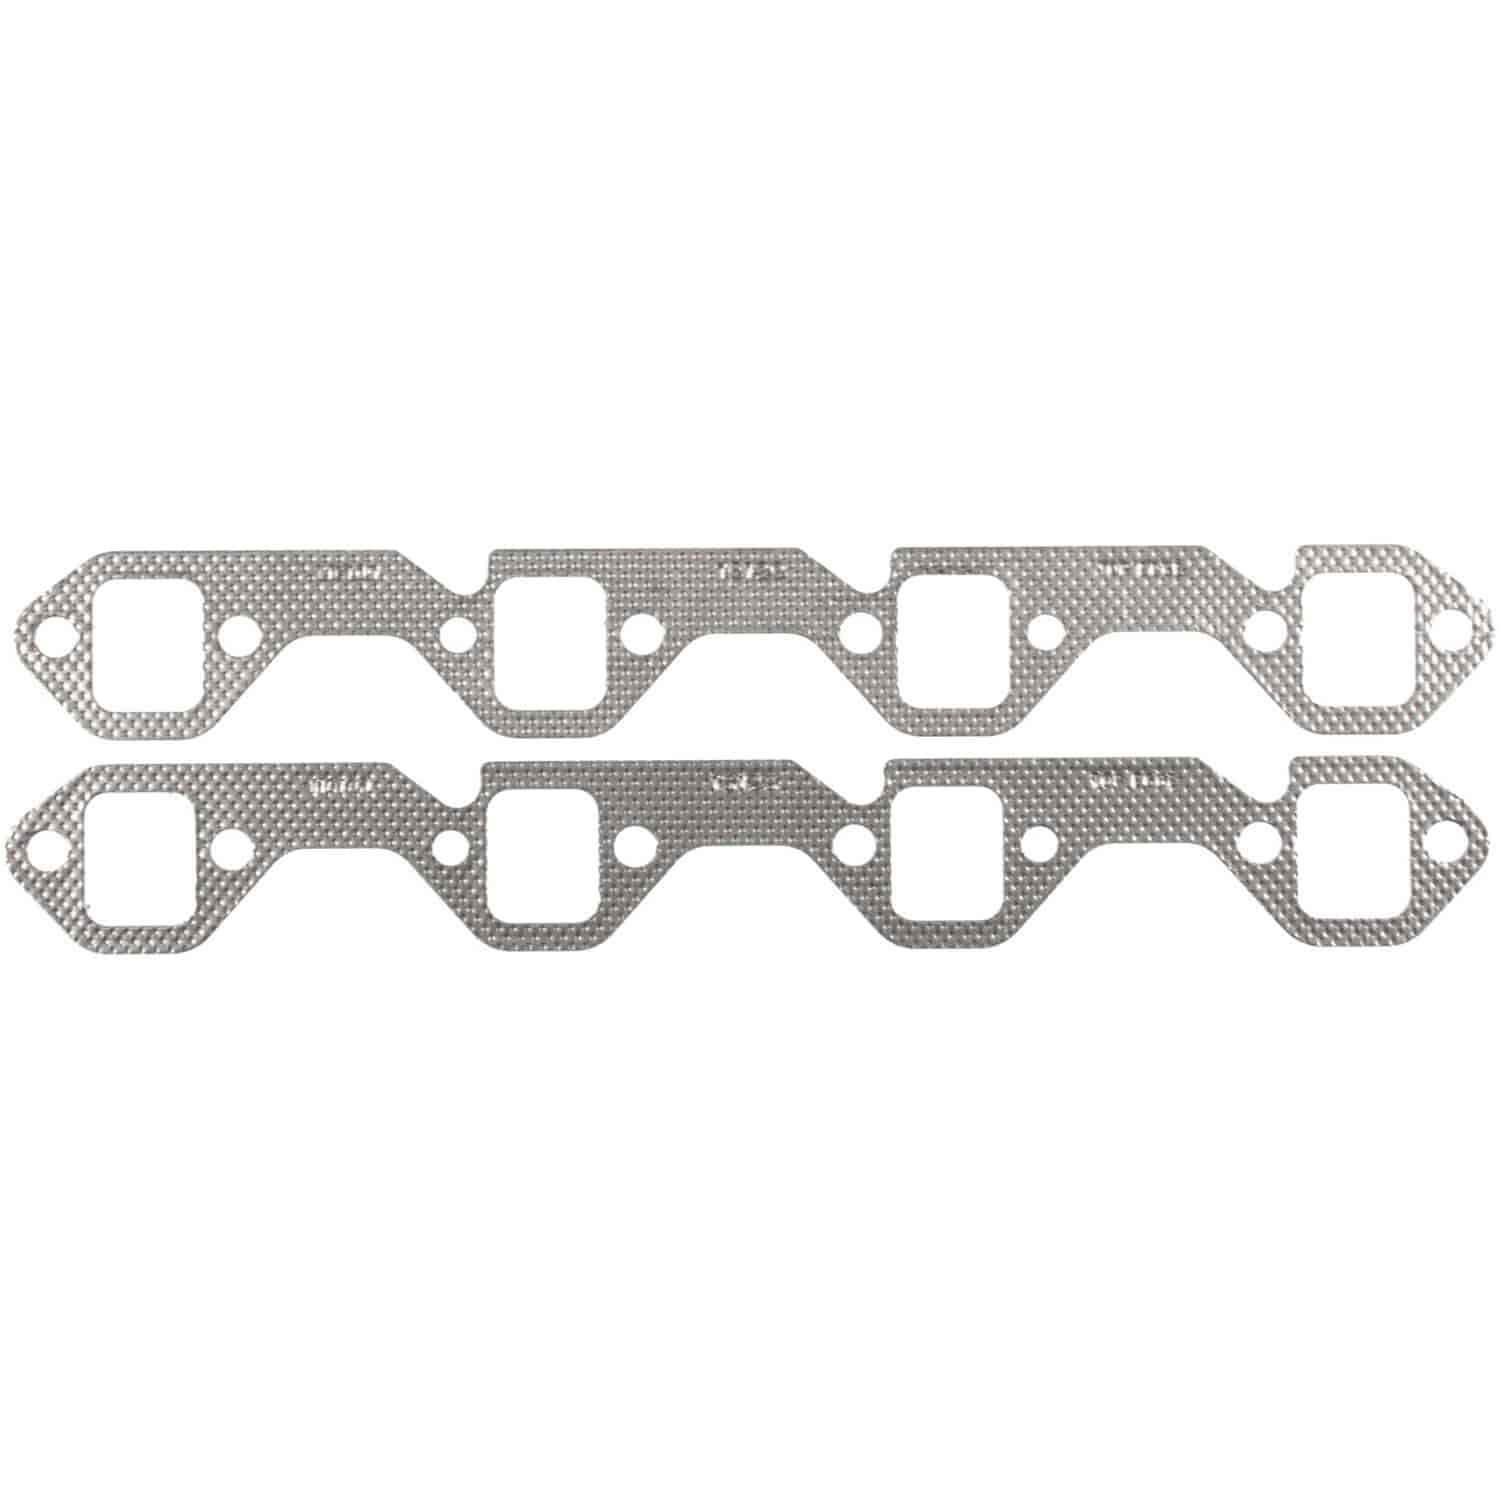 Exhaust Manifold Gasket Set 1969-1997 Small Block Ford